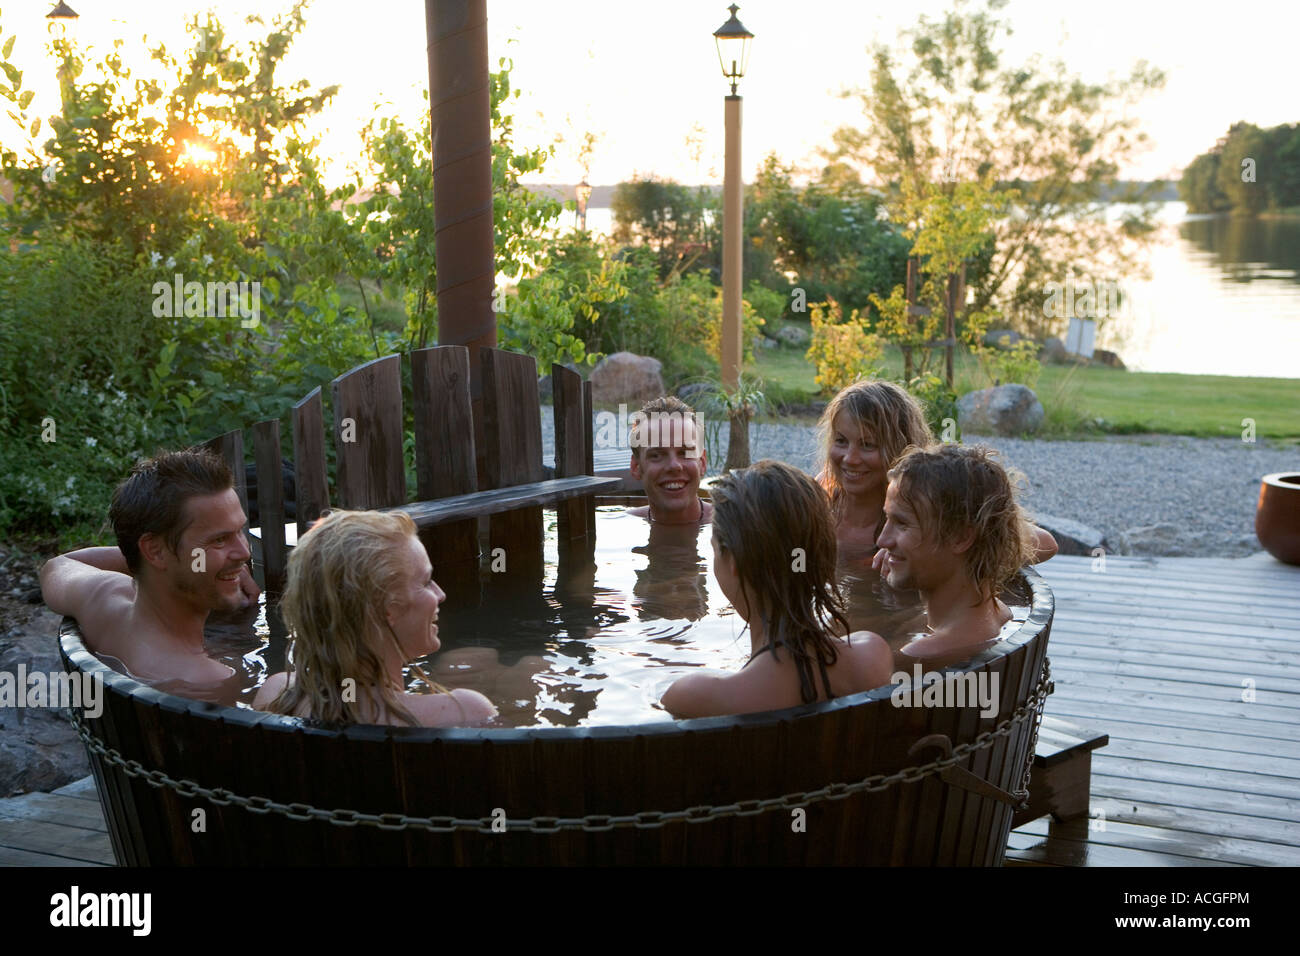 A group of people bathing in a barrel outdoors. Stock Photo